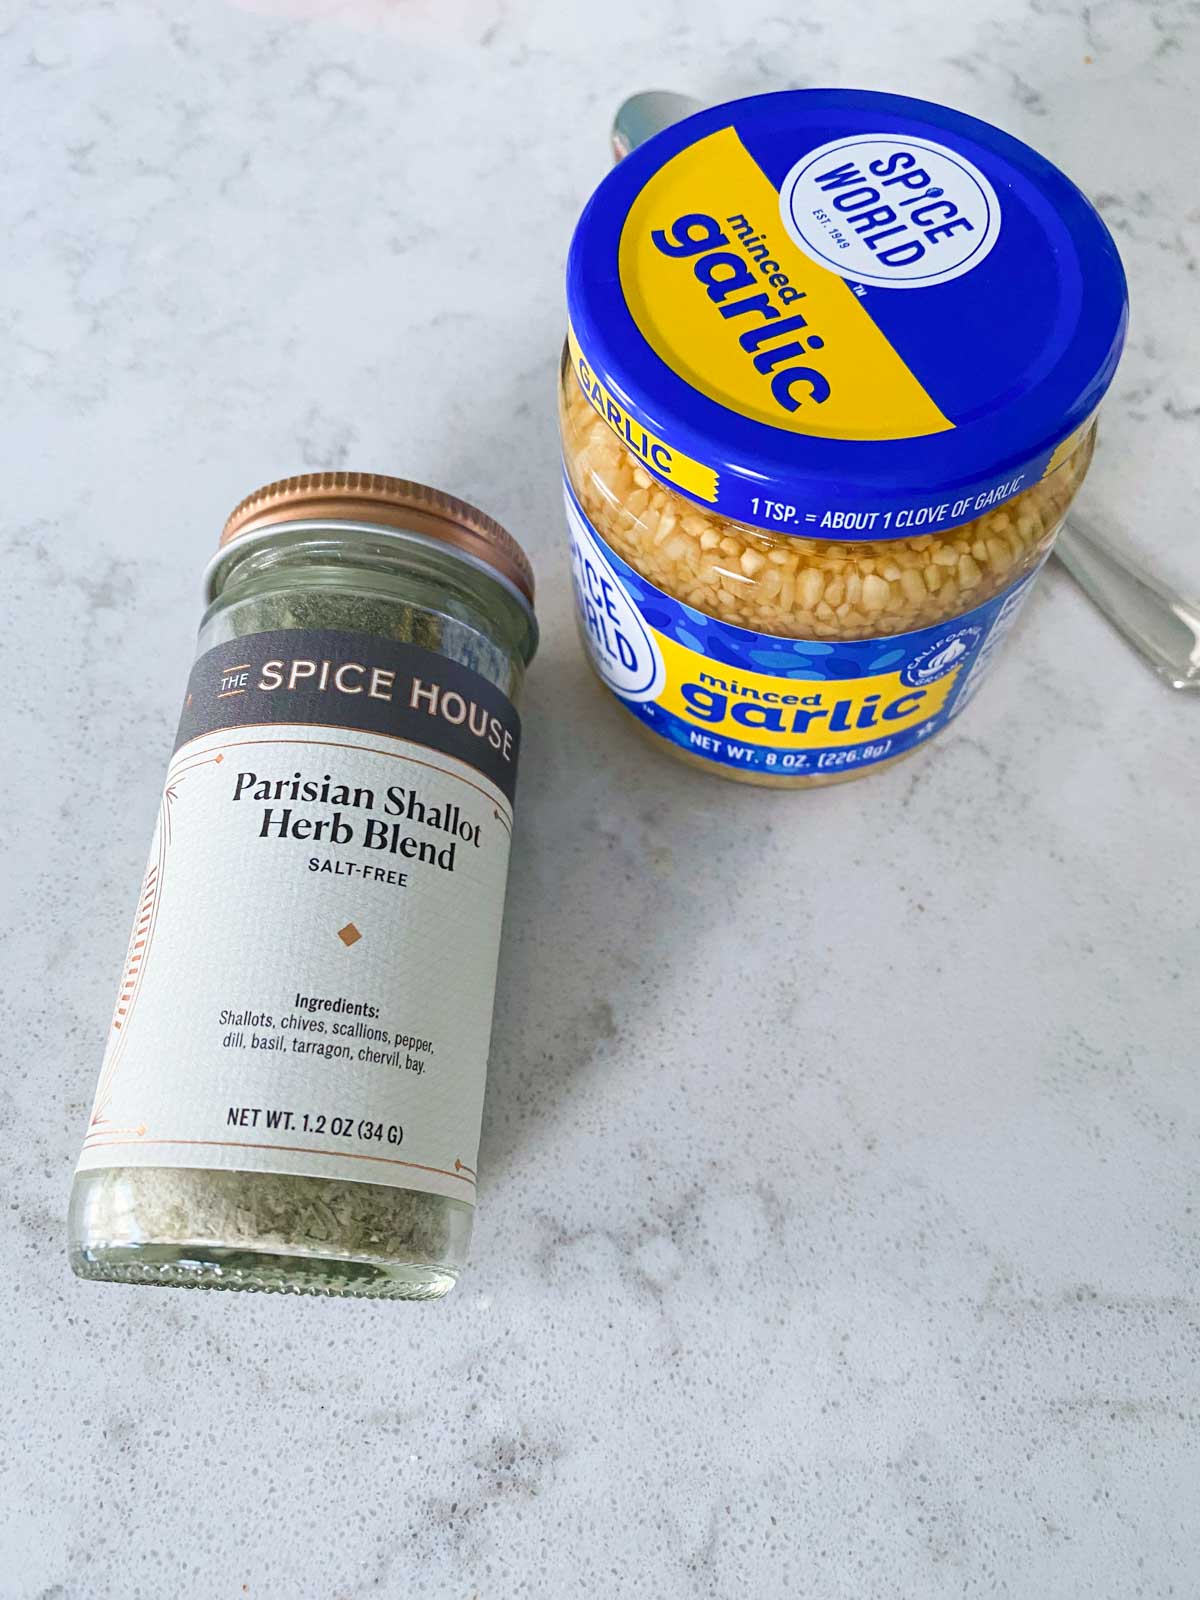 A jar of herbs and a jar of minced garlic on the counter.